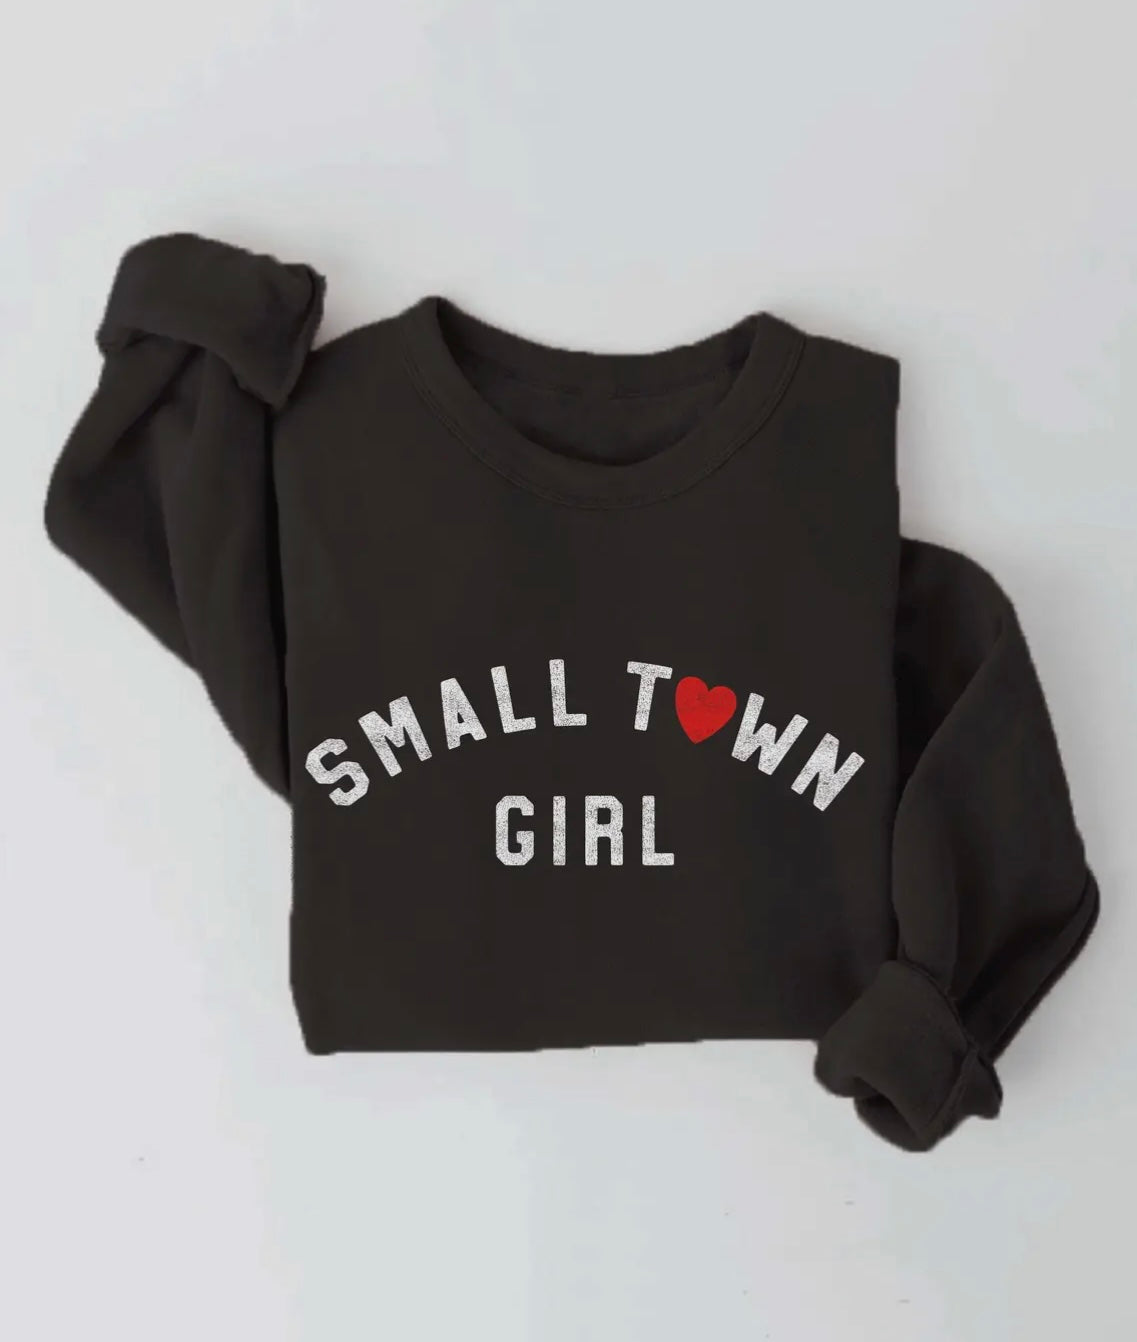 Small Town Girl Graphic Crewneck Sweatshirt by Oat Collective